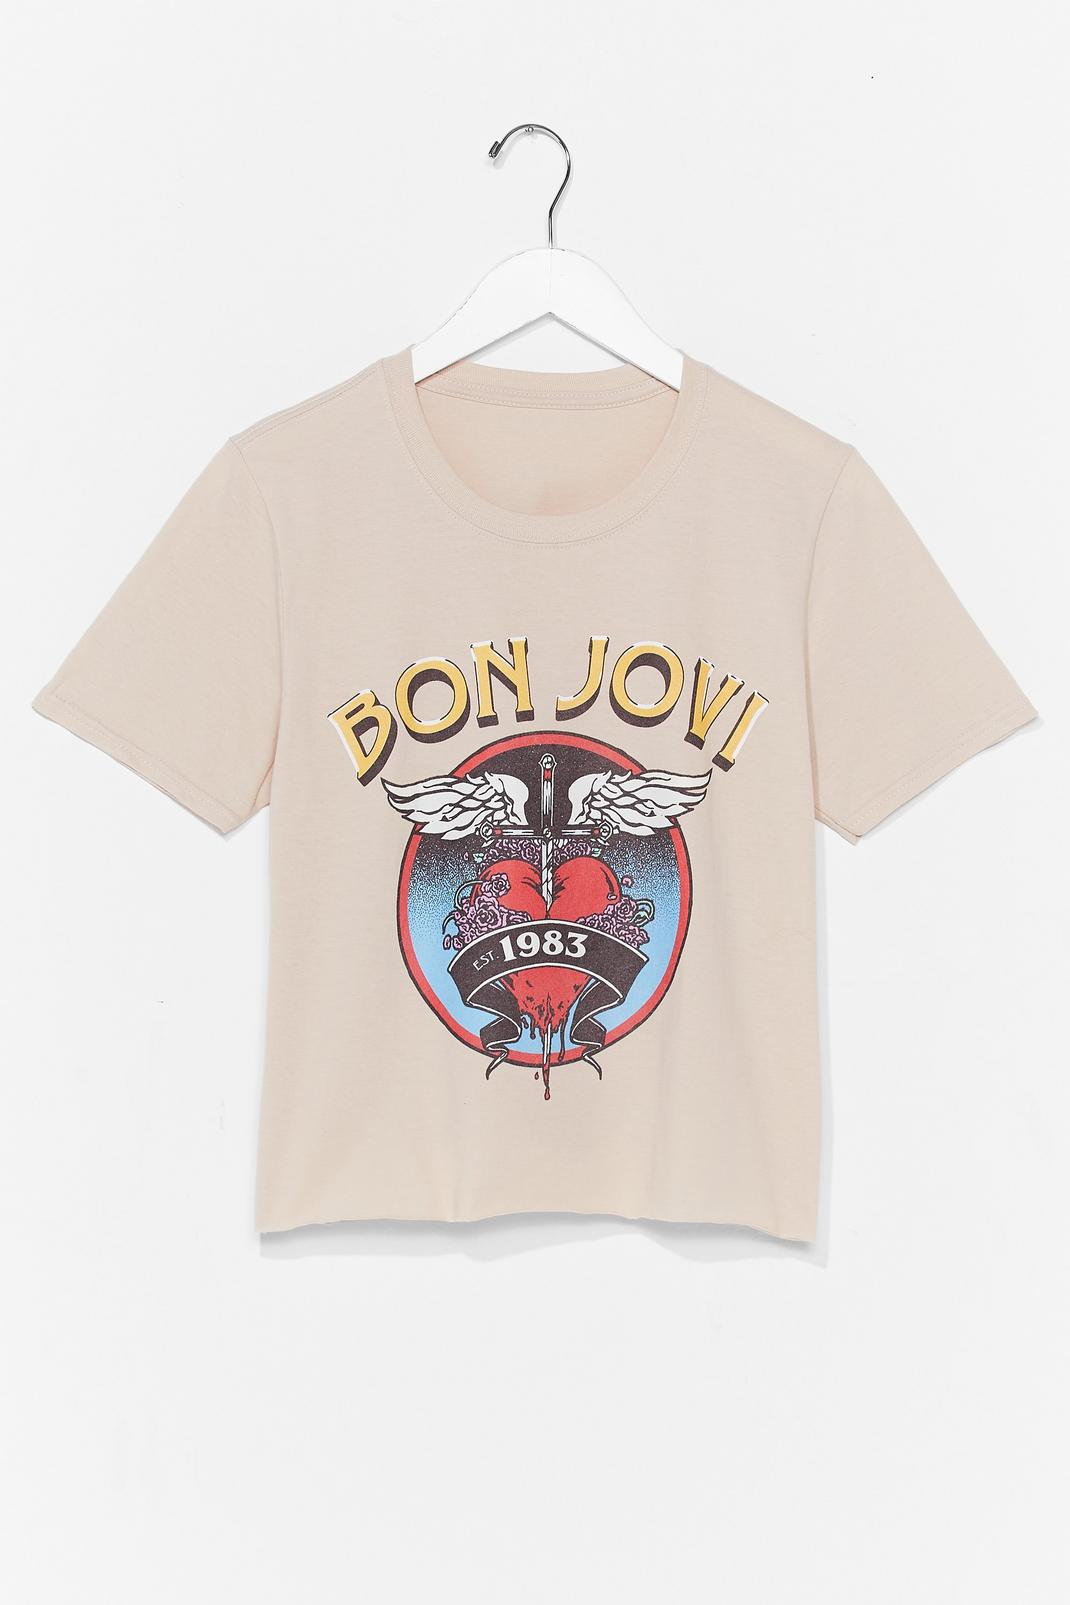 Bon Jovi Cropped Graphic Band Tee image number 1